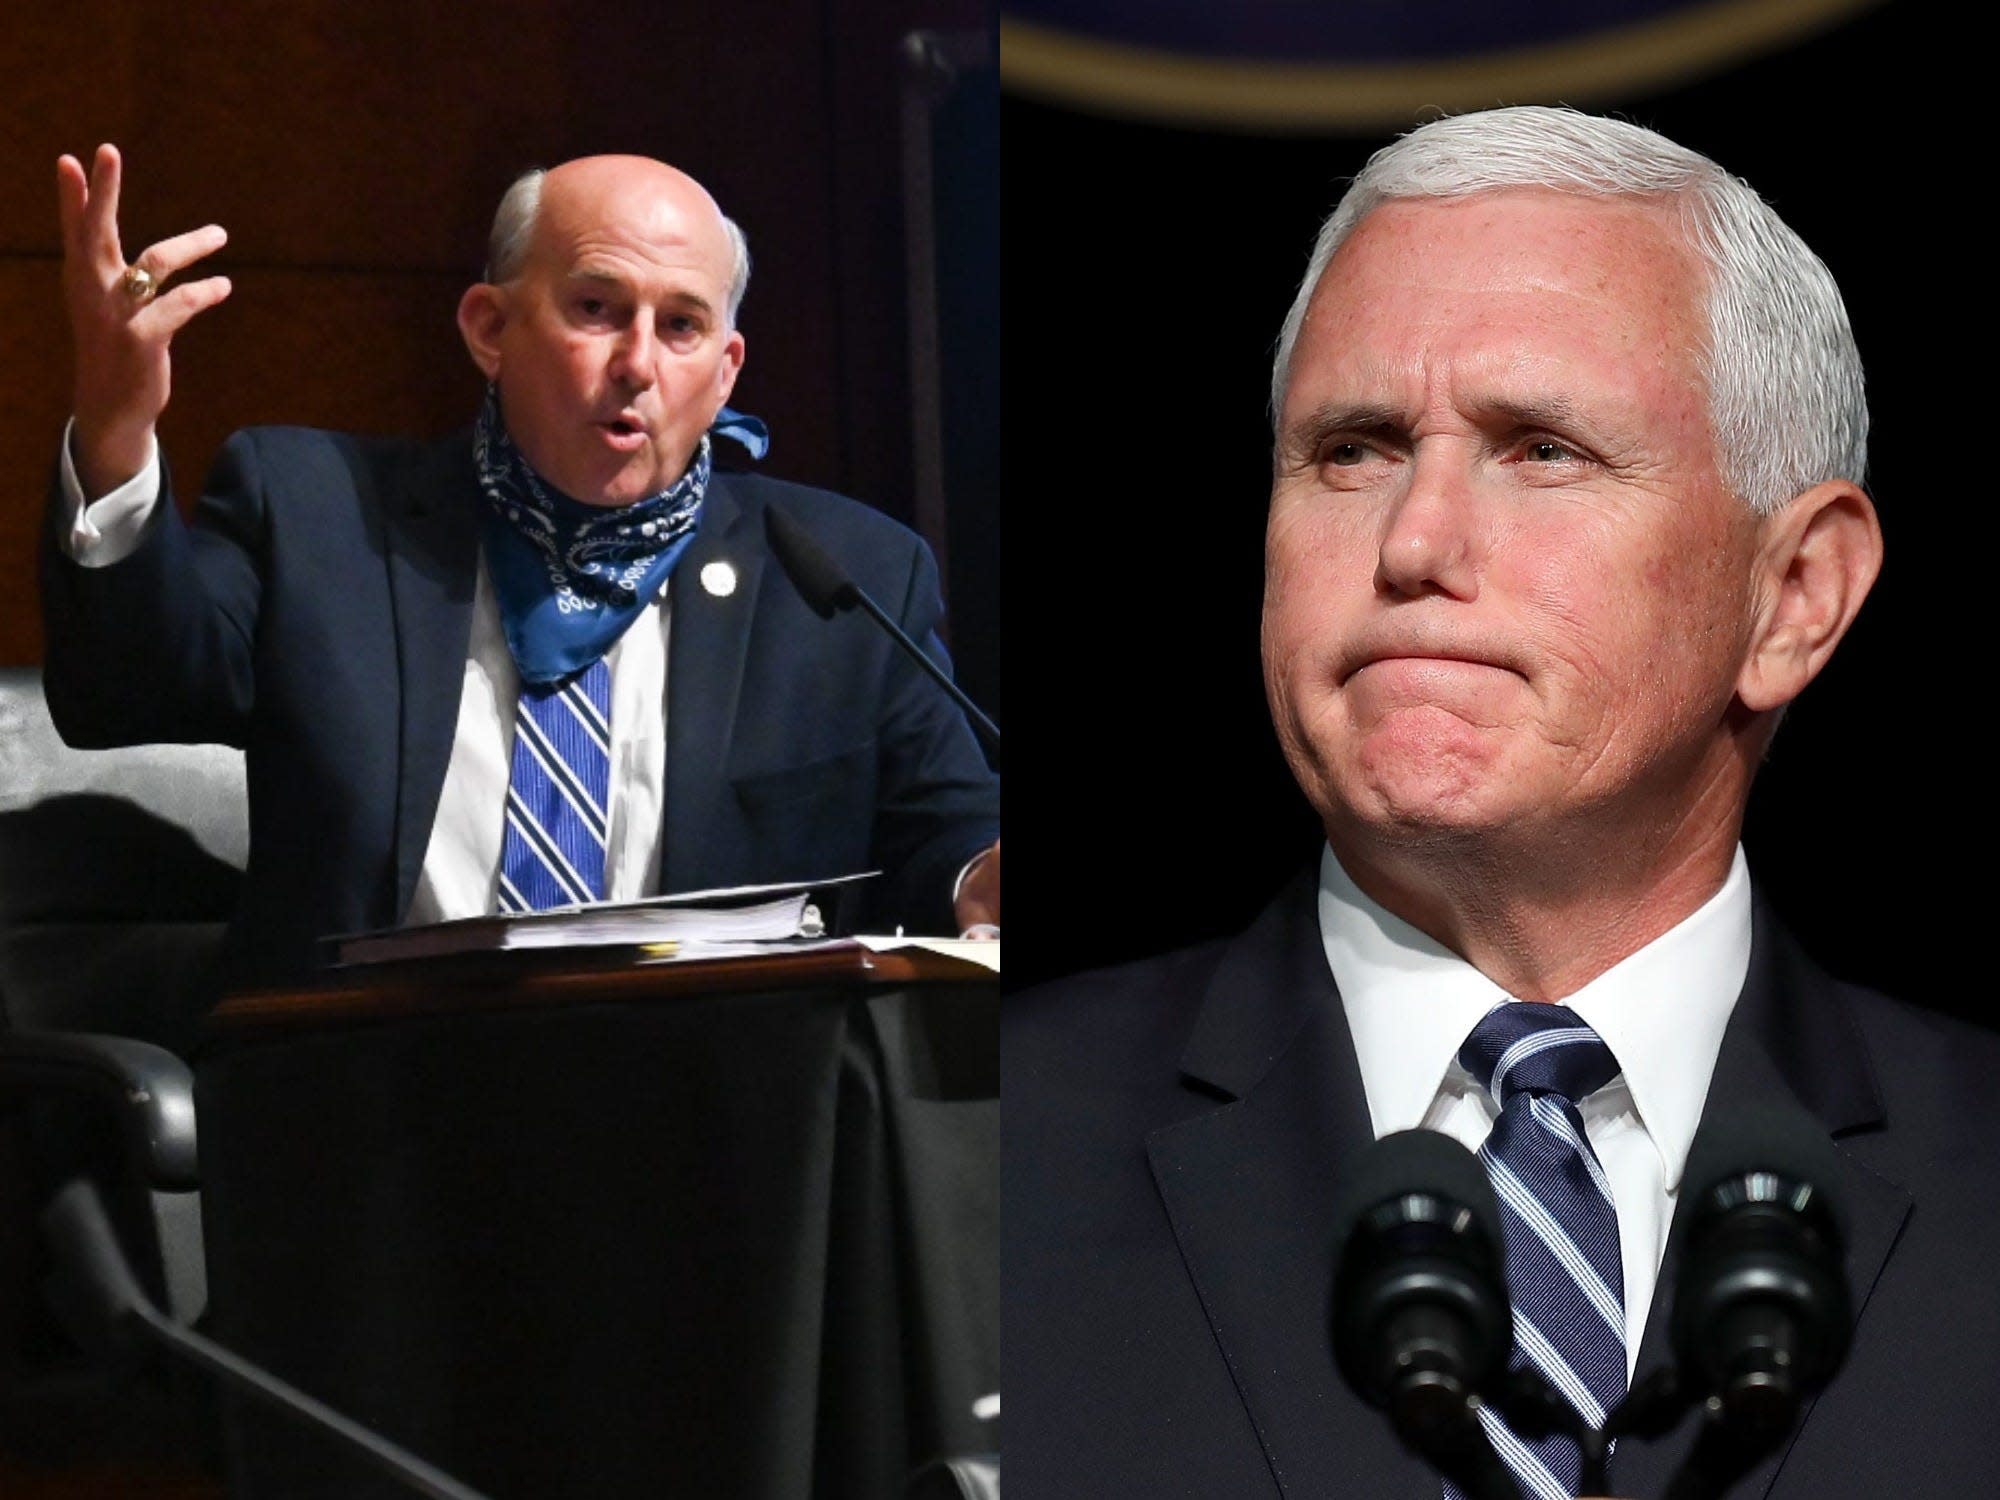 After Pence told a court that he was the wrong person to sue, Trump fans who tried to overturn the 2020 election told the judge that he shouldn’t listen to the VP because he is more than just an ‘envelope opener in boss’